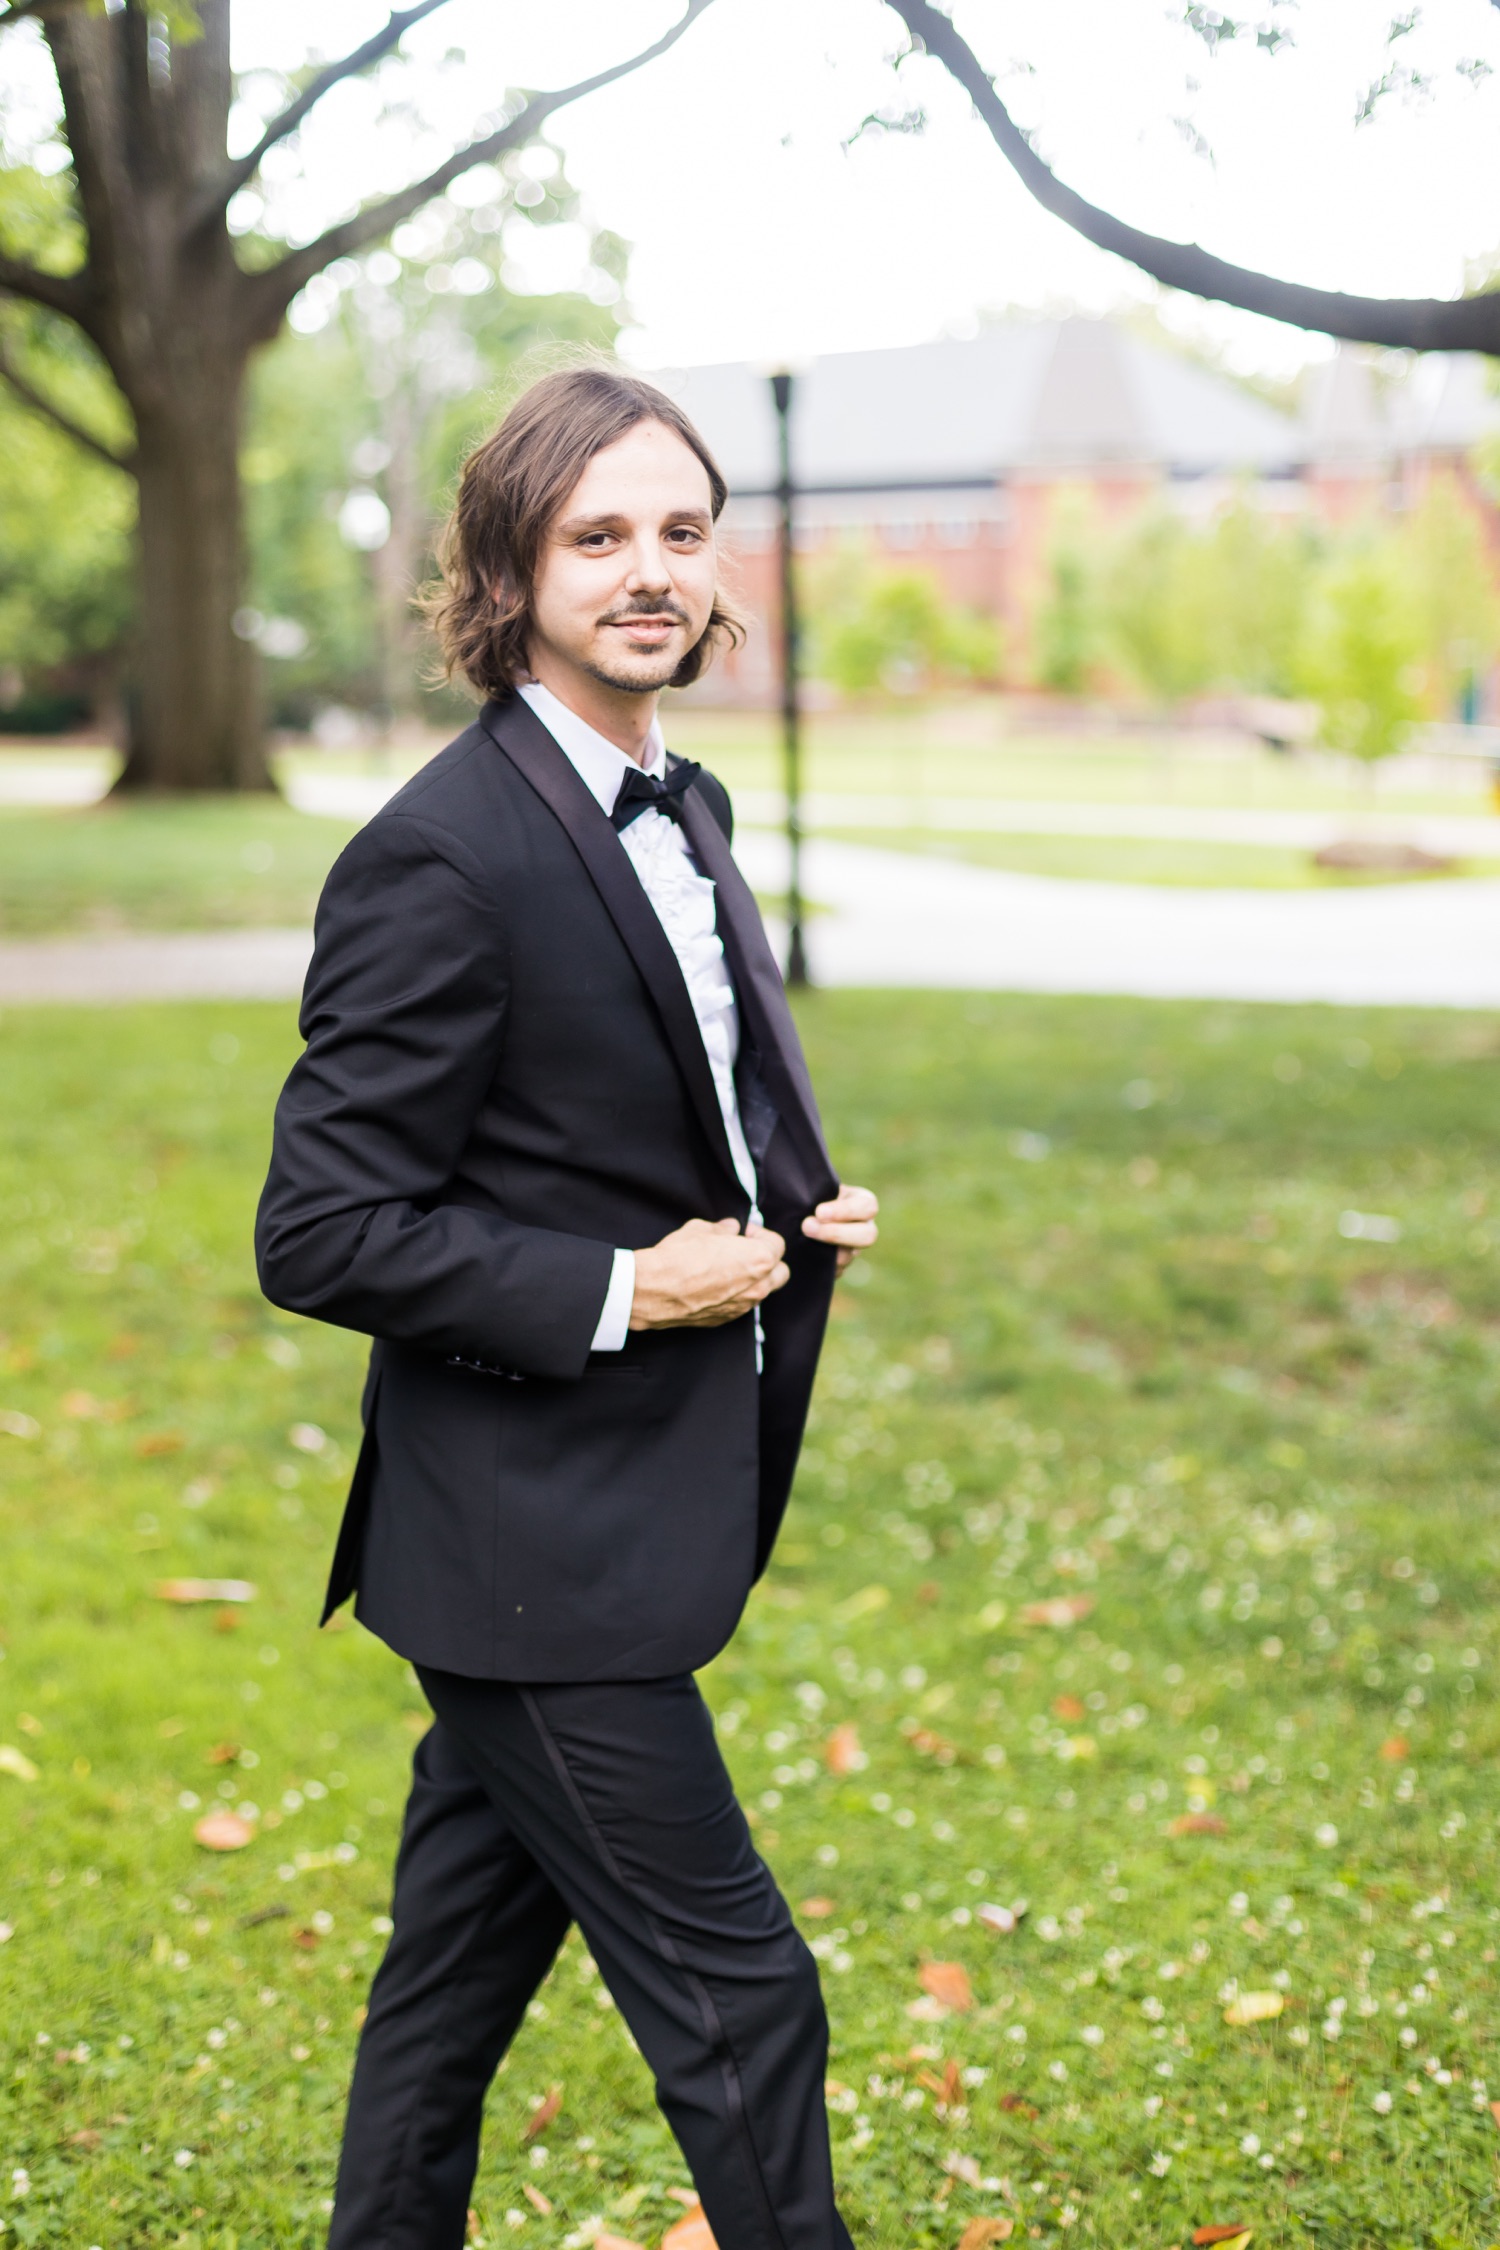 The groom looking at the camera as he walks buttoning his tuxedo jacket